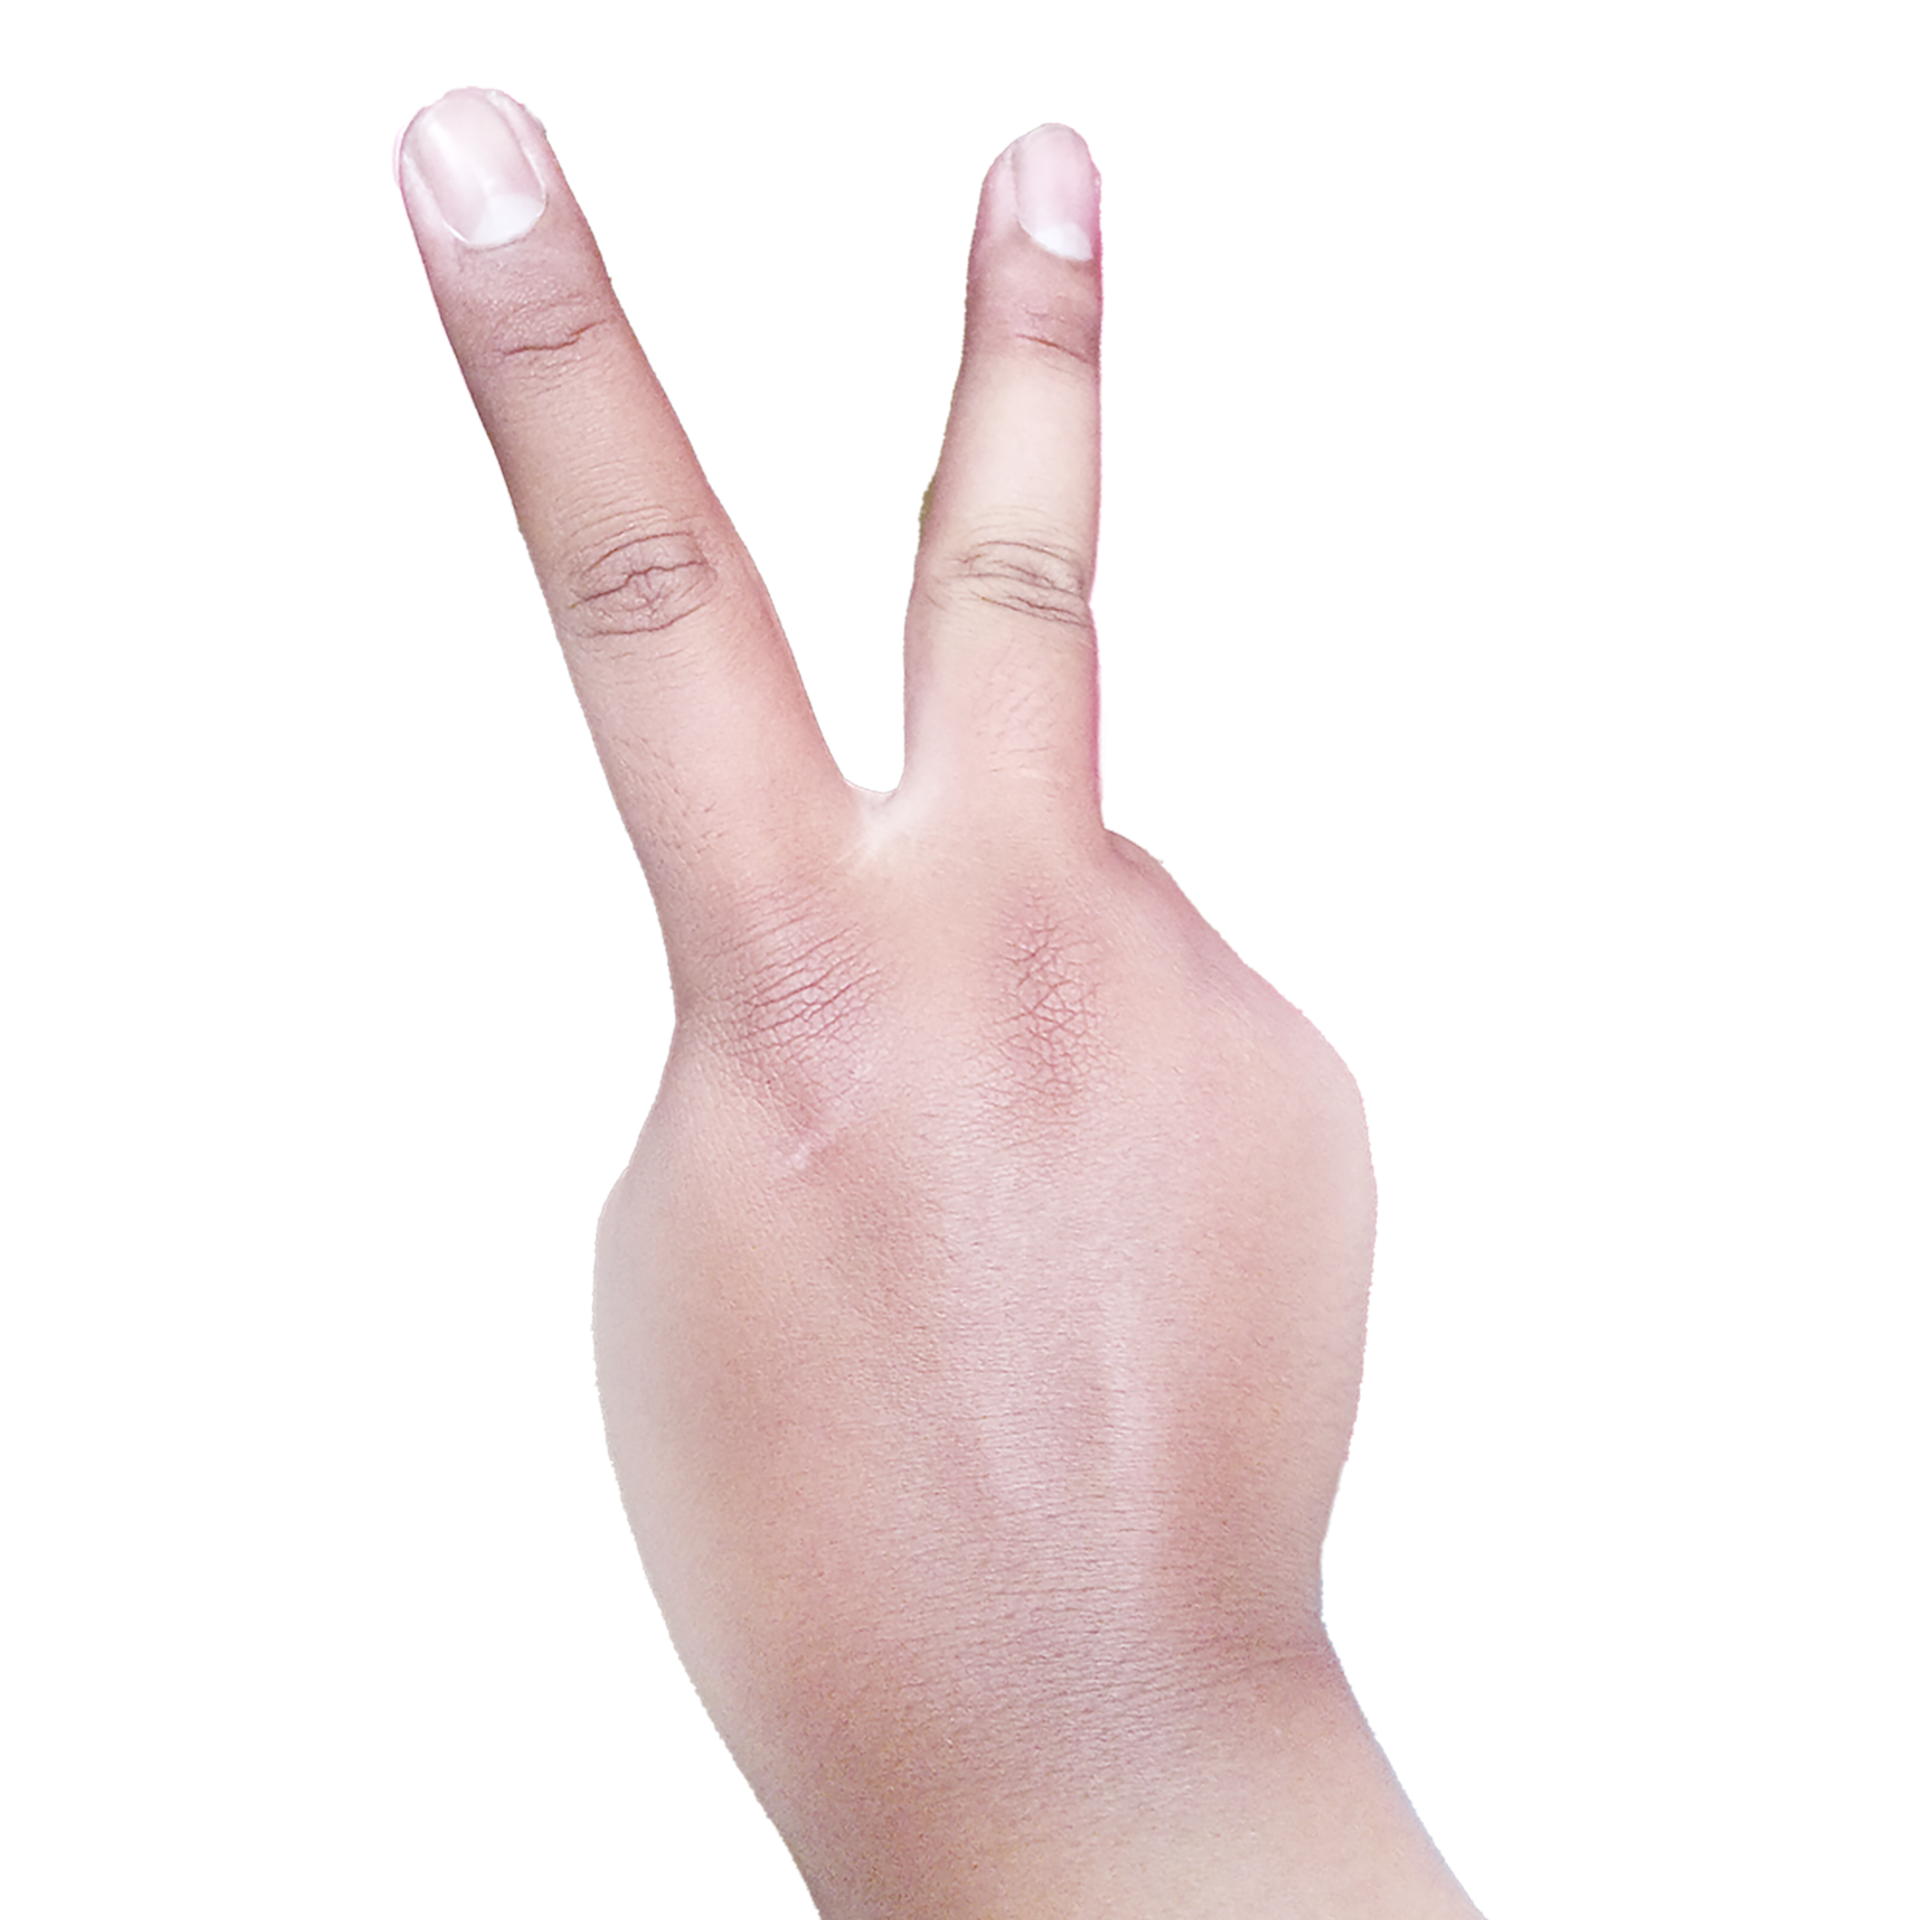 Peace Hand Sign PNGs for Free Download